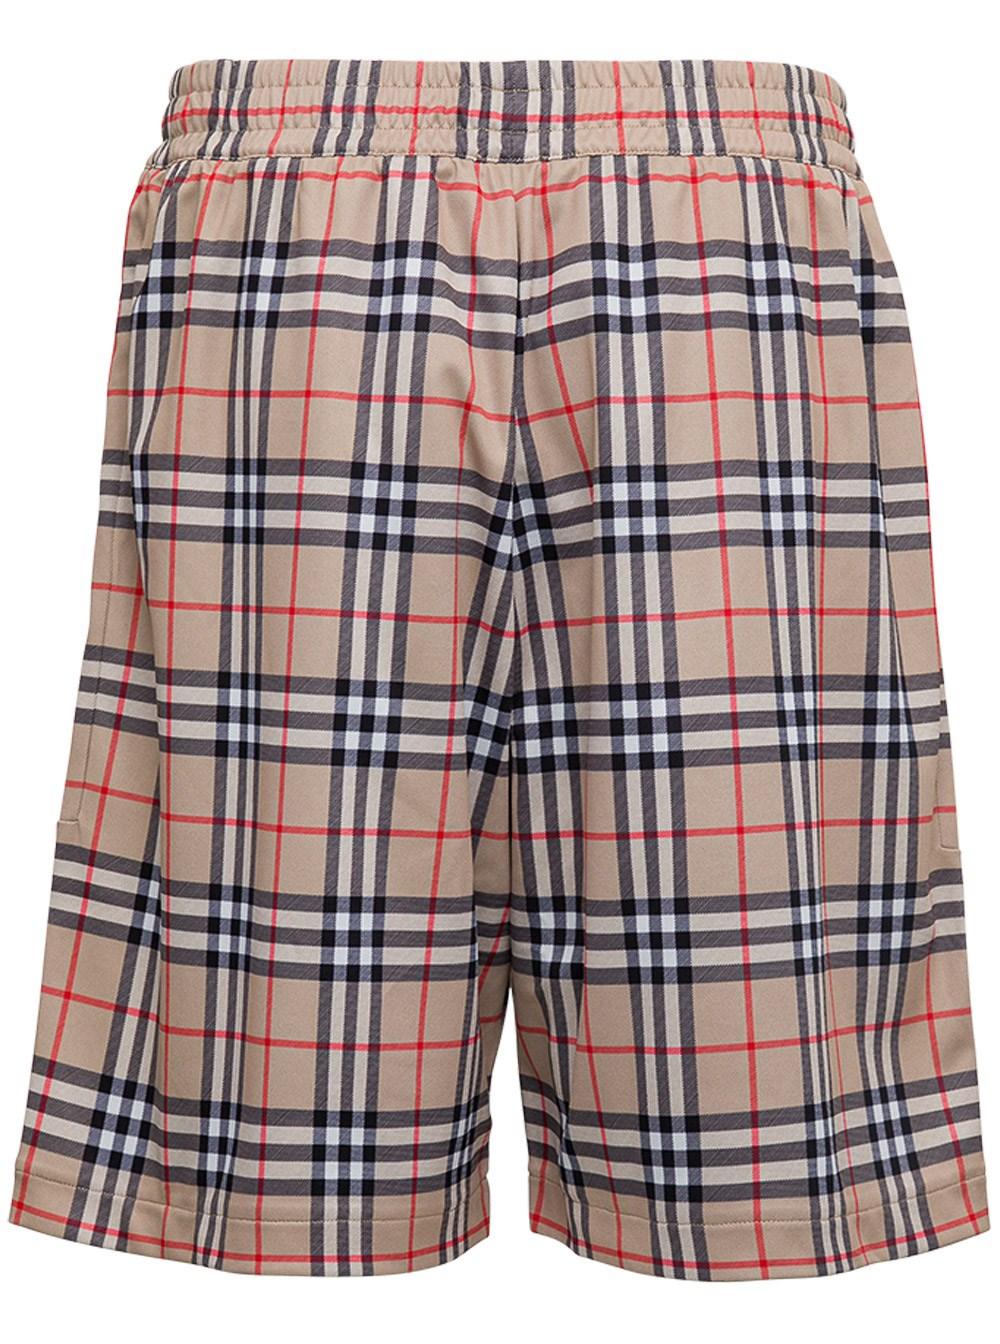 Burberry Synthetic Technical Check Nylon Bermuda Shorts in Beige 